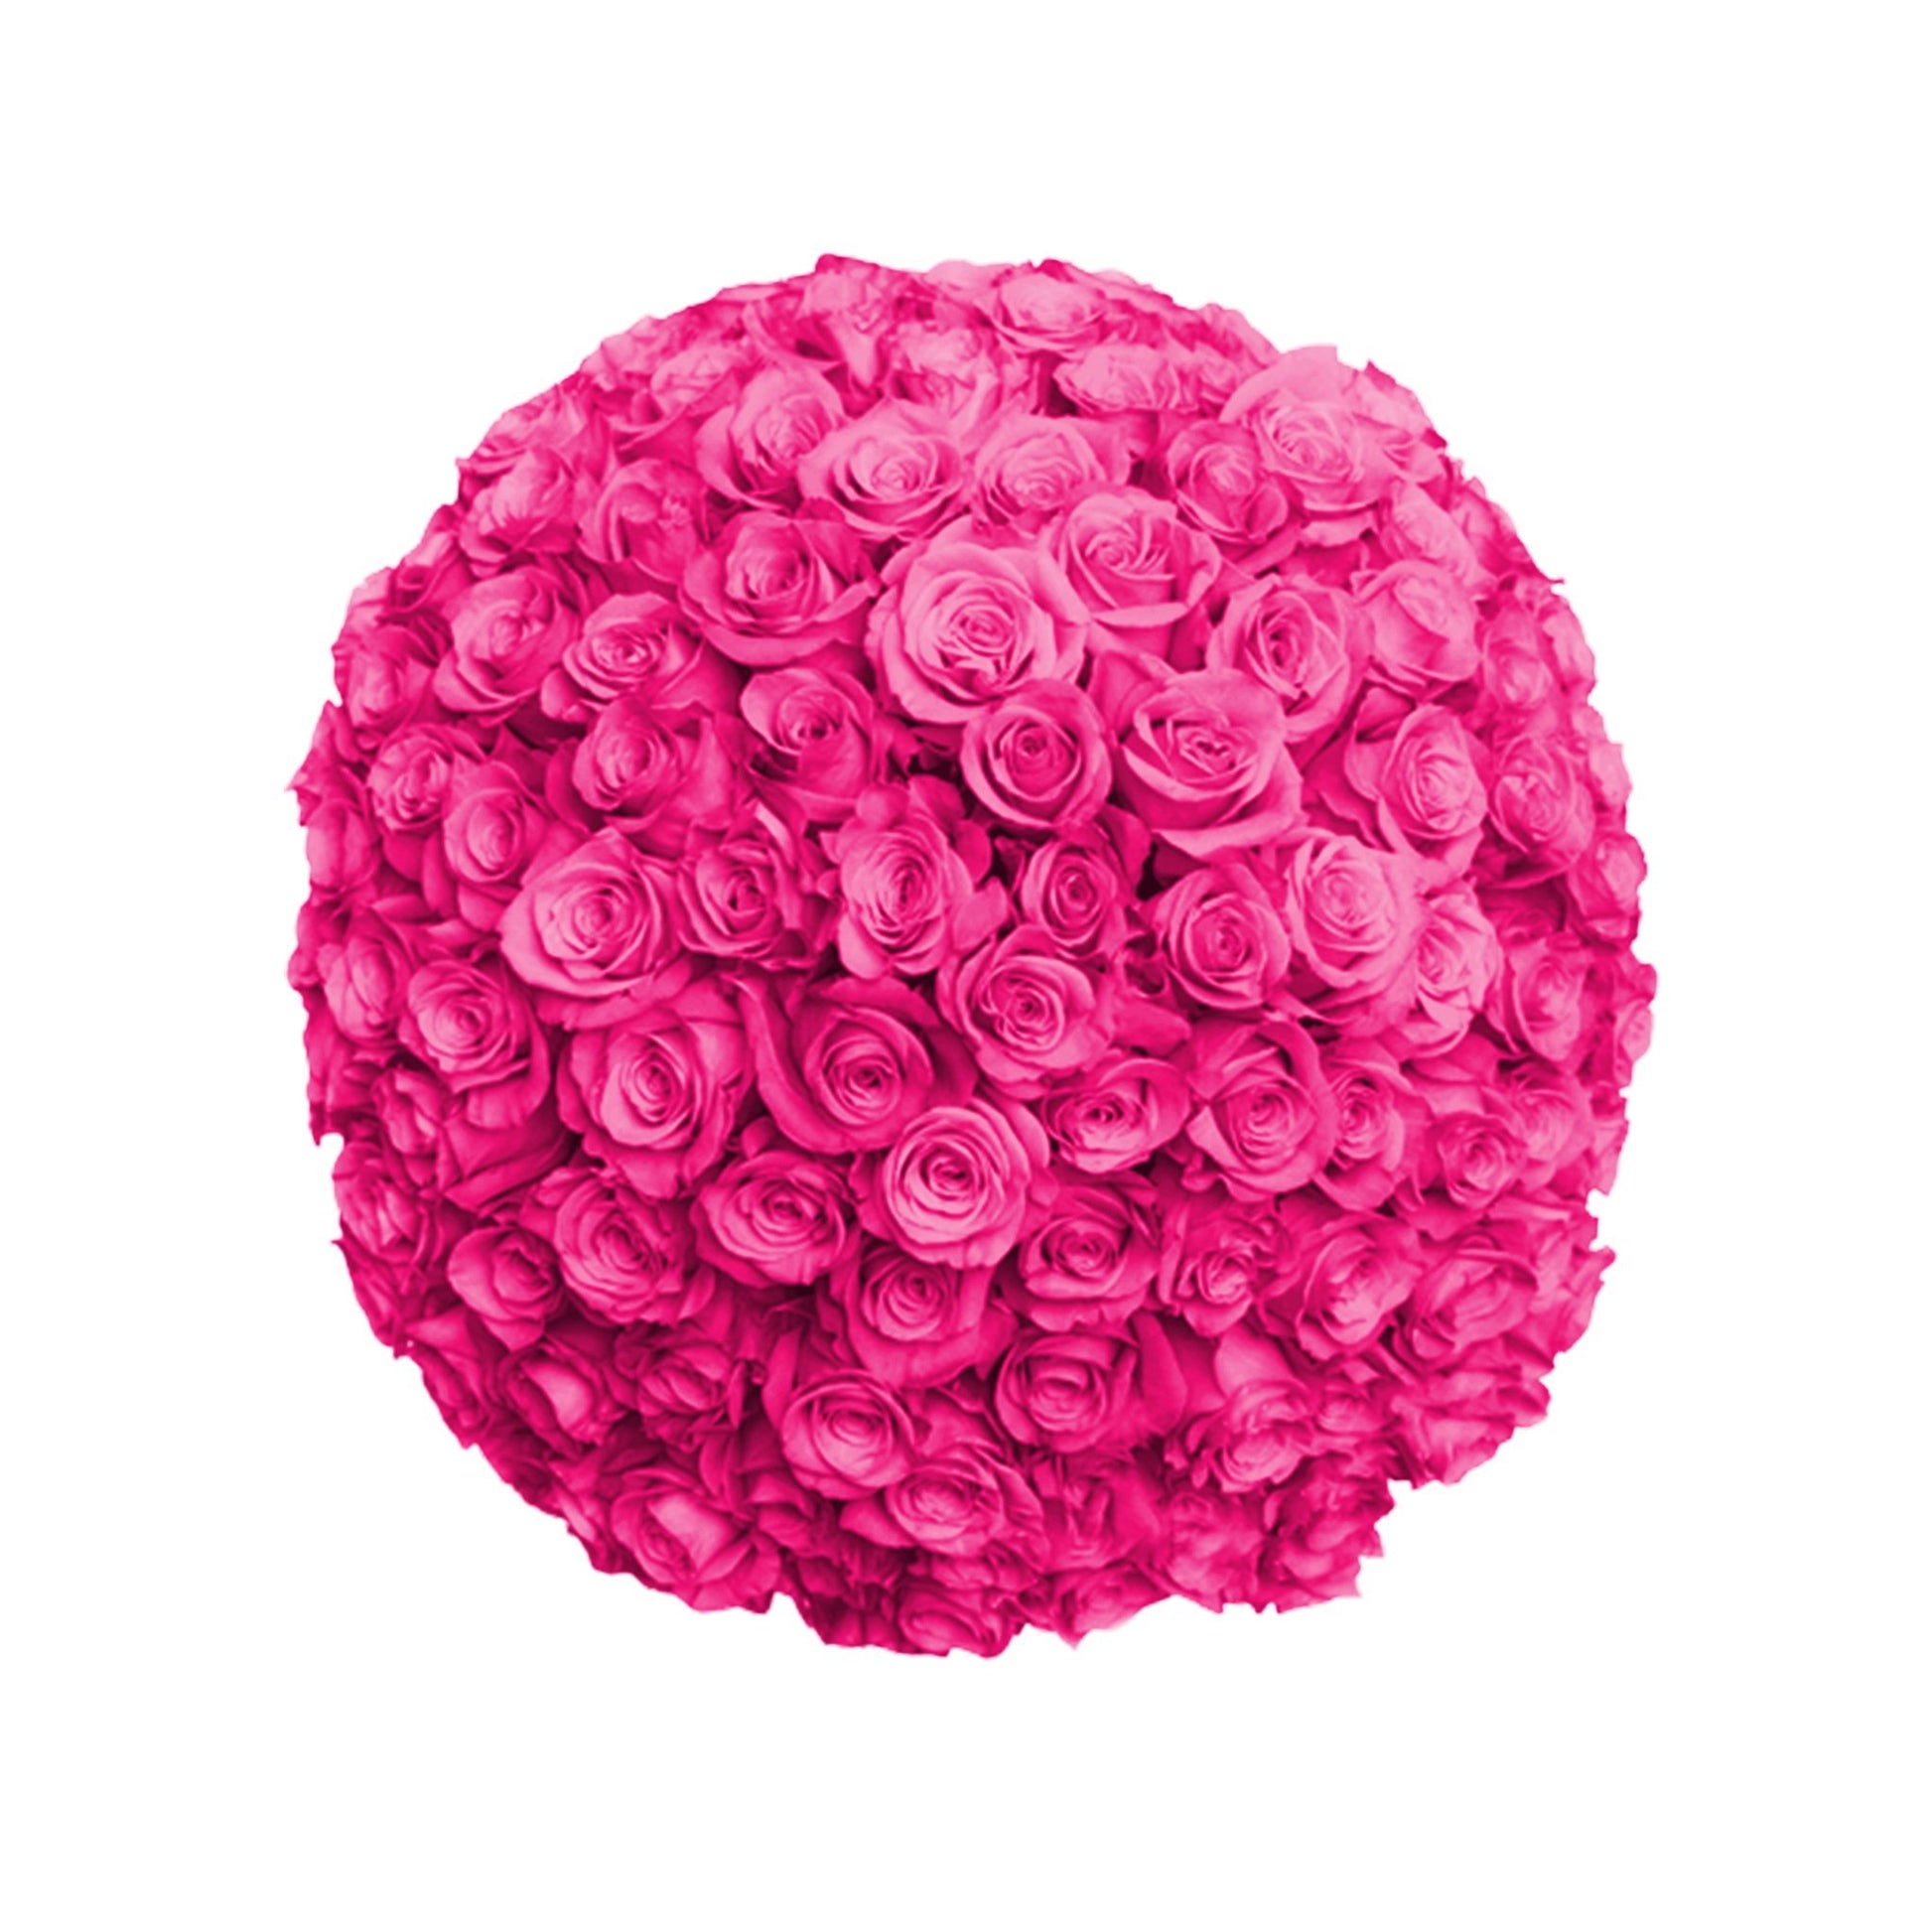 NYC Flower Delivery - Fresh Roses in a Vase | 100 Hot Pink Roses - Roses